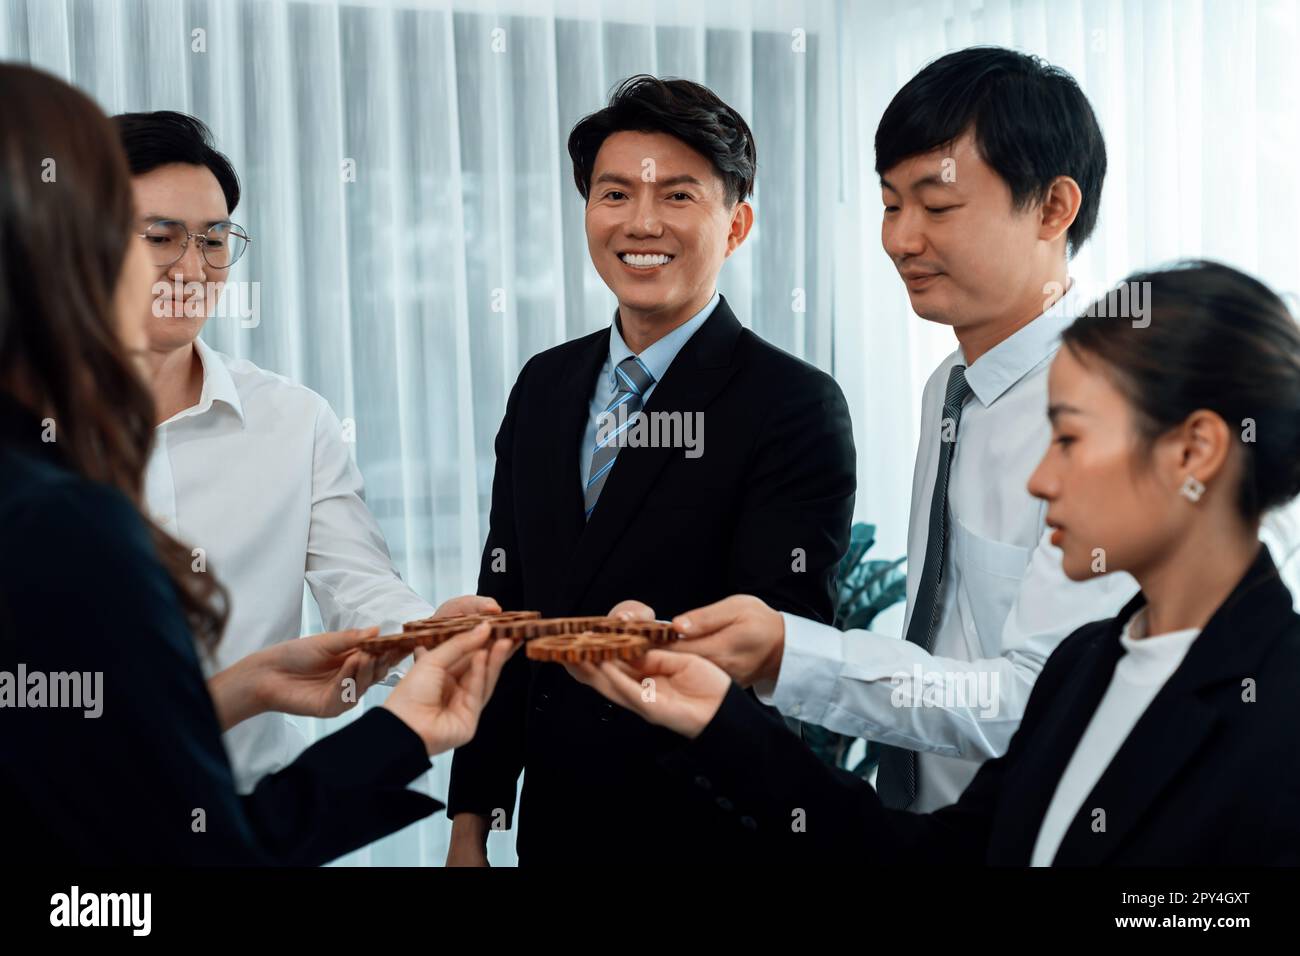 Closeup hand holding wooden gear by businesspeople wearing suit for harmony synergy in office workplace concept. Group of people hand making chain of Stock Photo